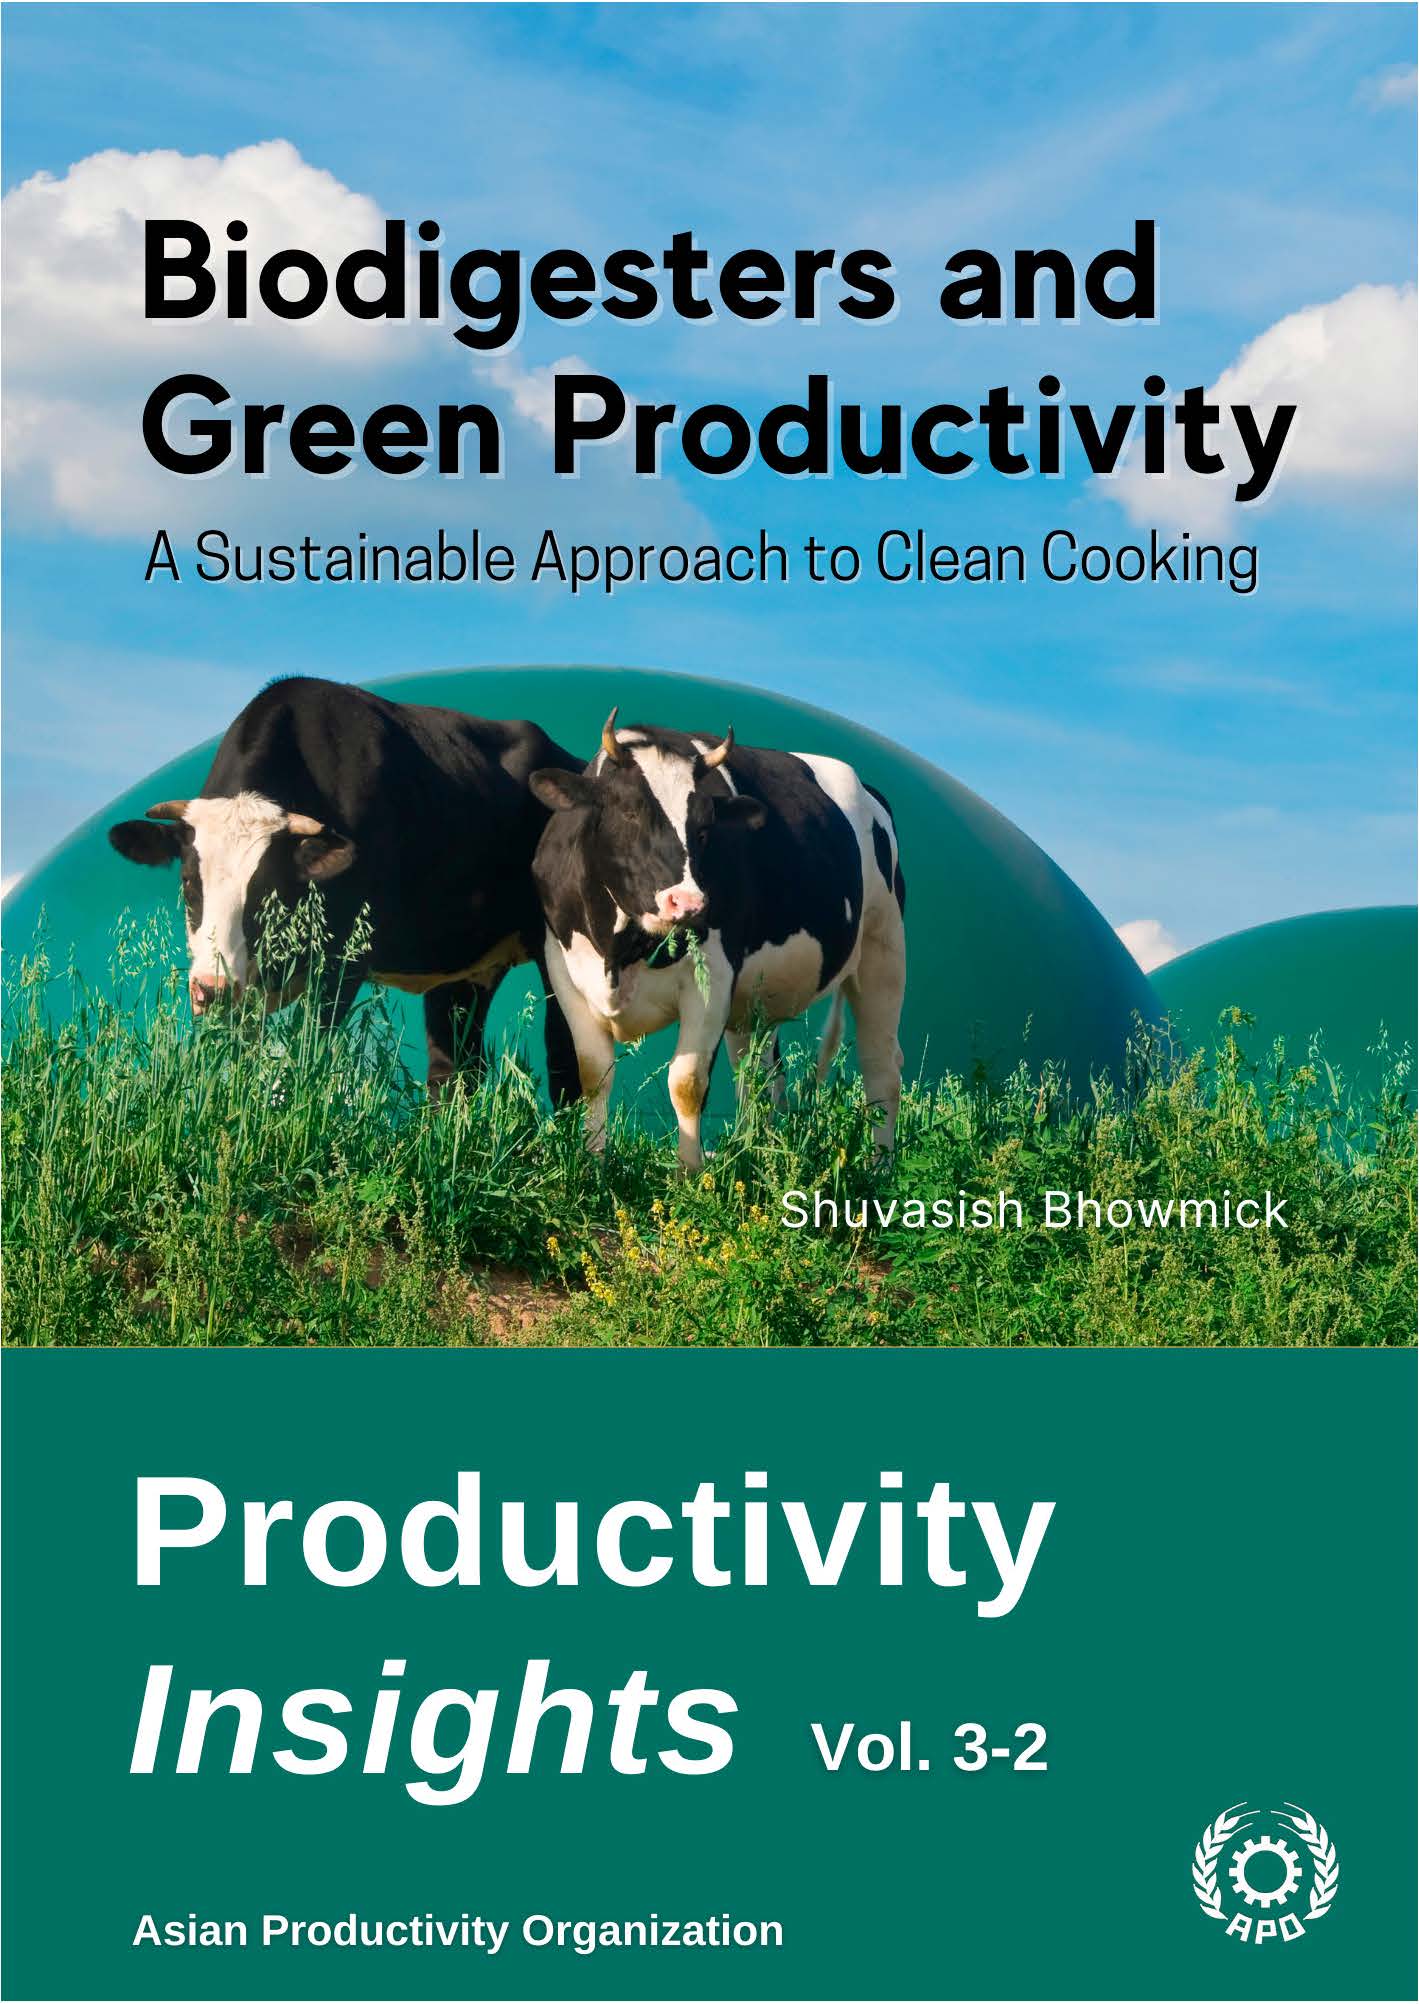 Biodigesters and Green Productivity: A Sustainable Approach to Clean Cooking